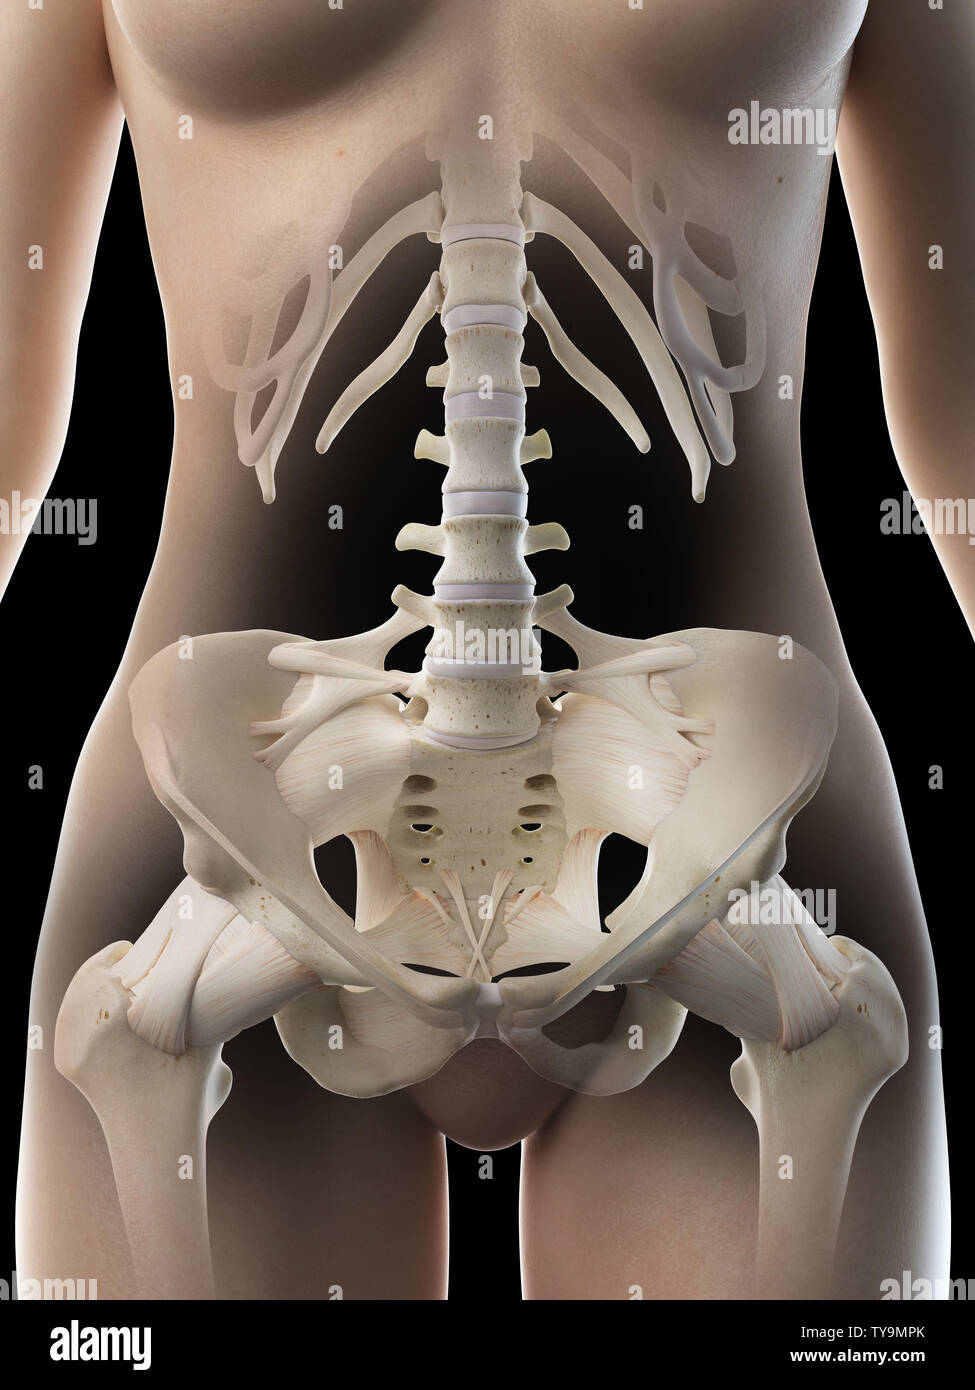 Pelvic Bones High Resolution Stock Photography and Images - Alamy